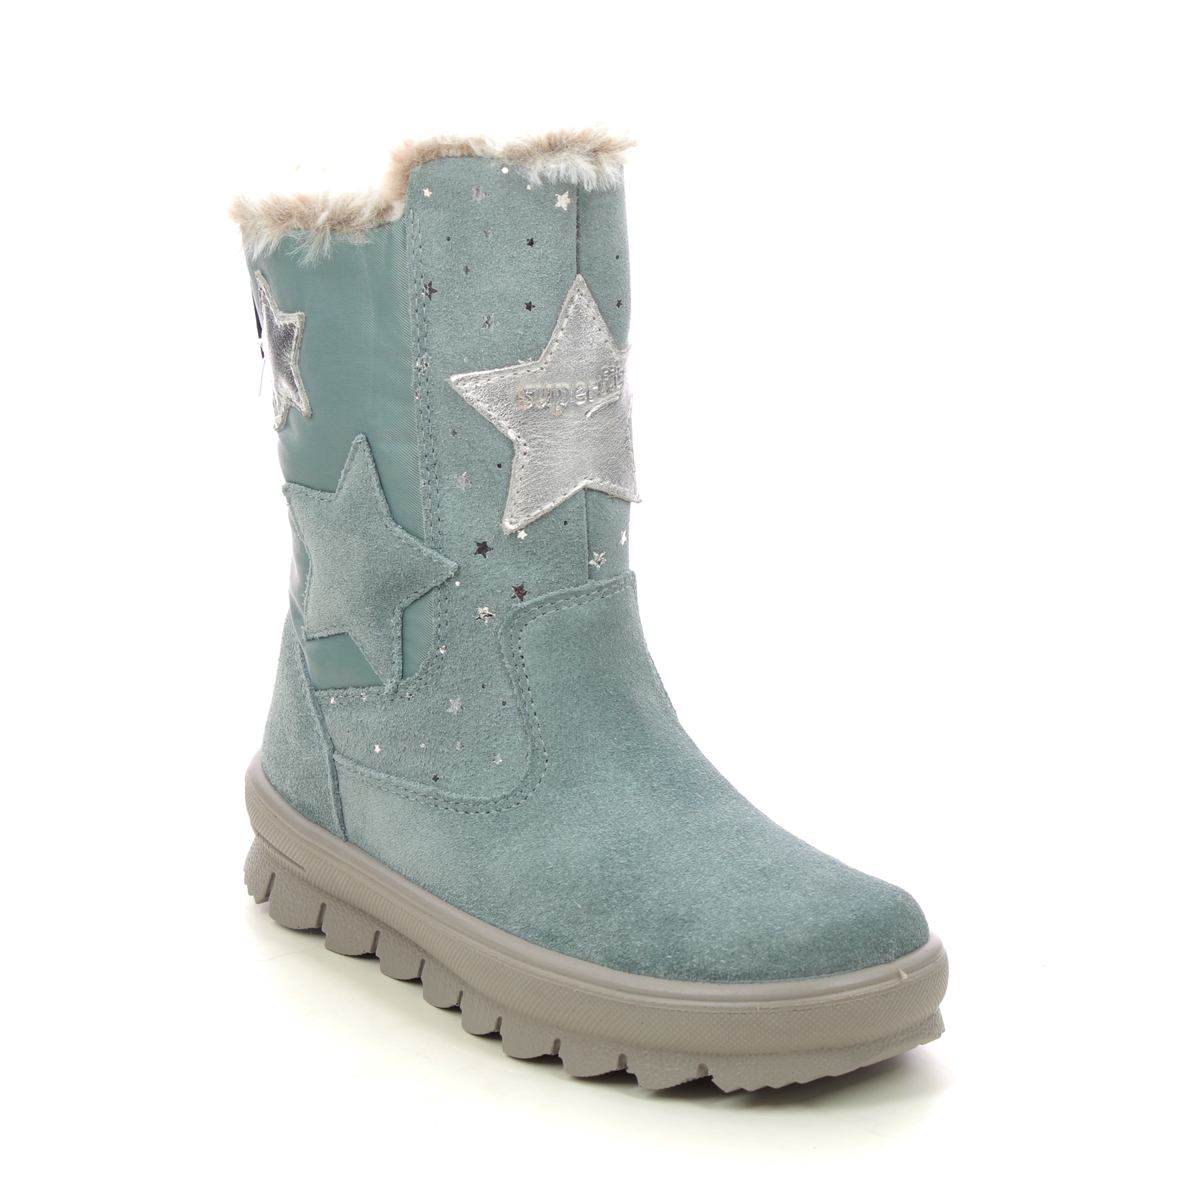 Superfit Flavia Star Gtx Blue Suede Kids Girls Boots 1000219-7500 In Size 27 In Plain Blue Suede For kids